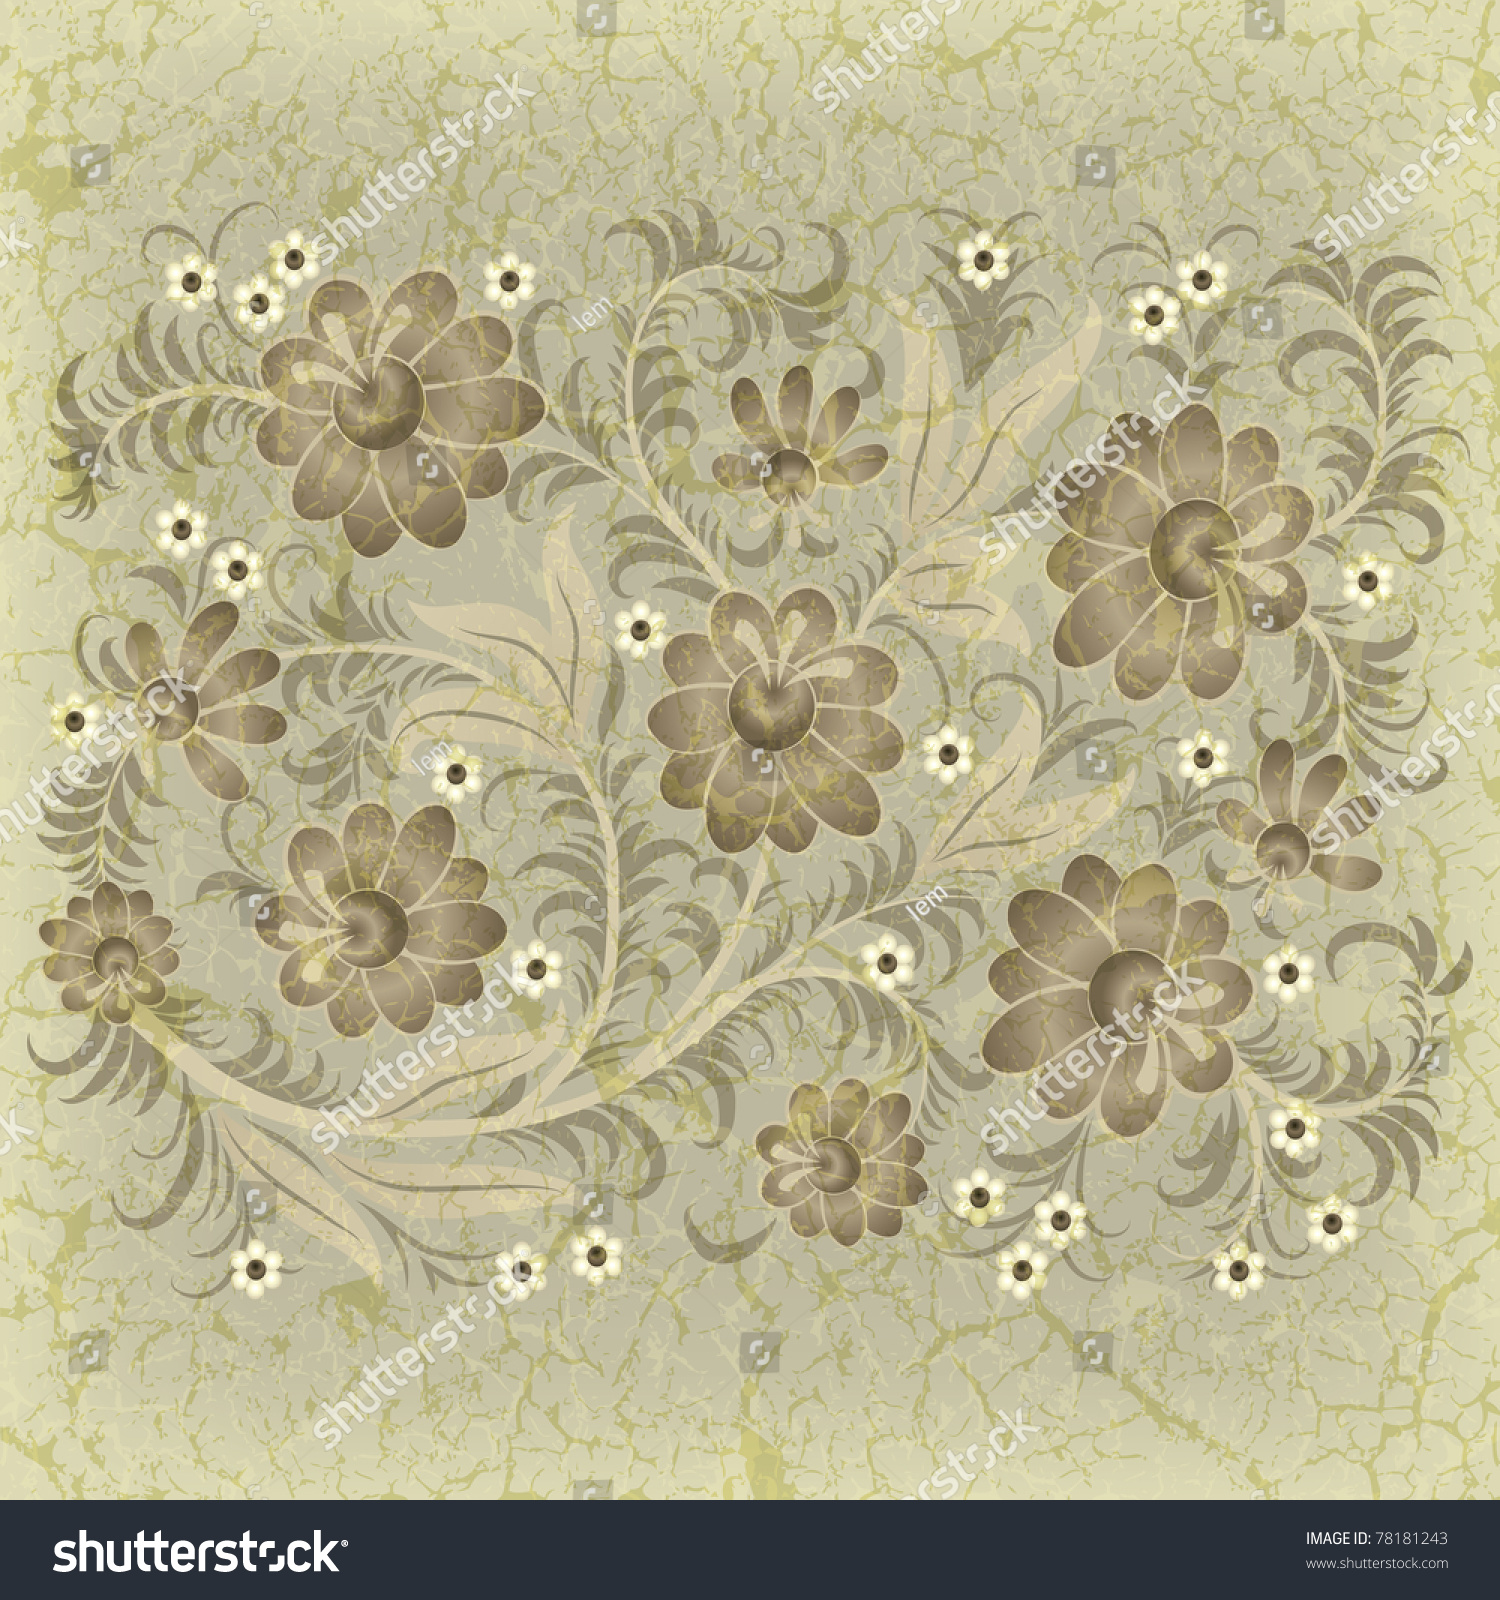 abstract grunge floral ornament with flowers on beige #78181243